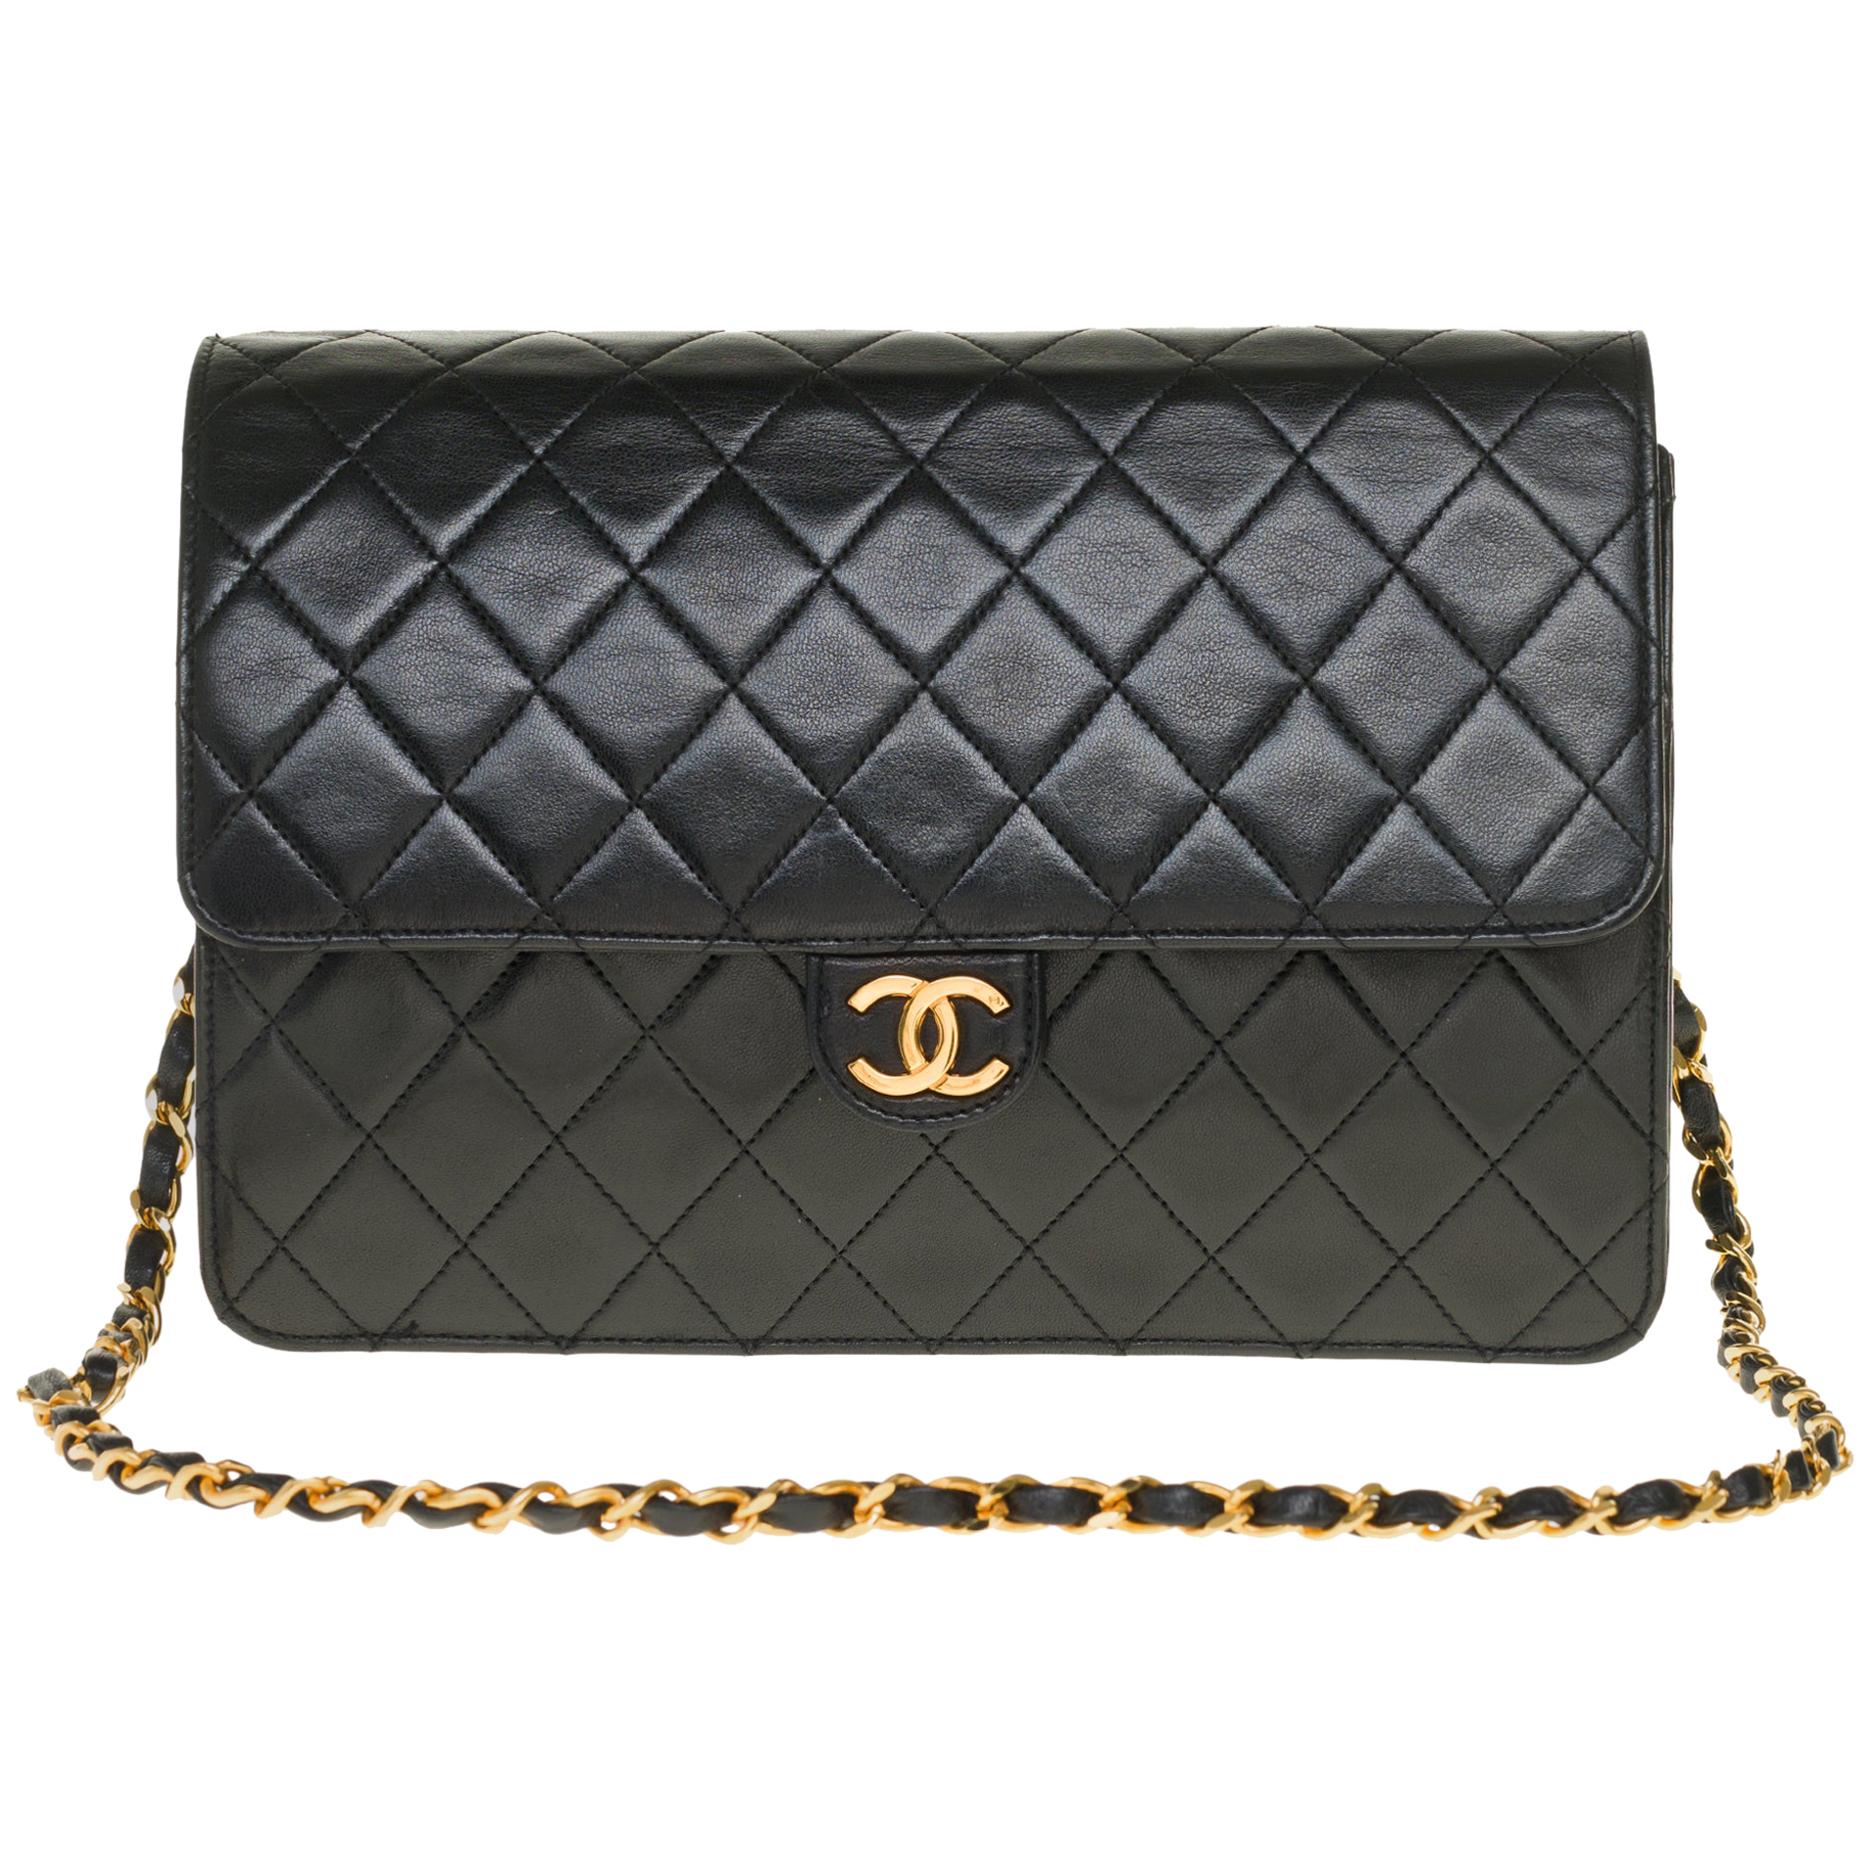 Stunning Chanel Classic shoulder bag in black quilted lambskin and gold hardware